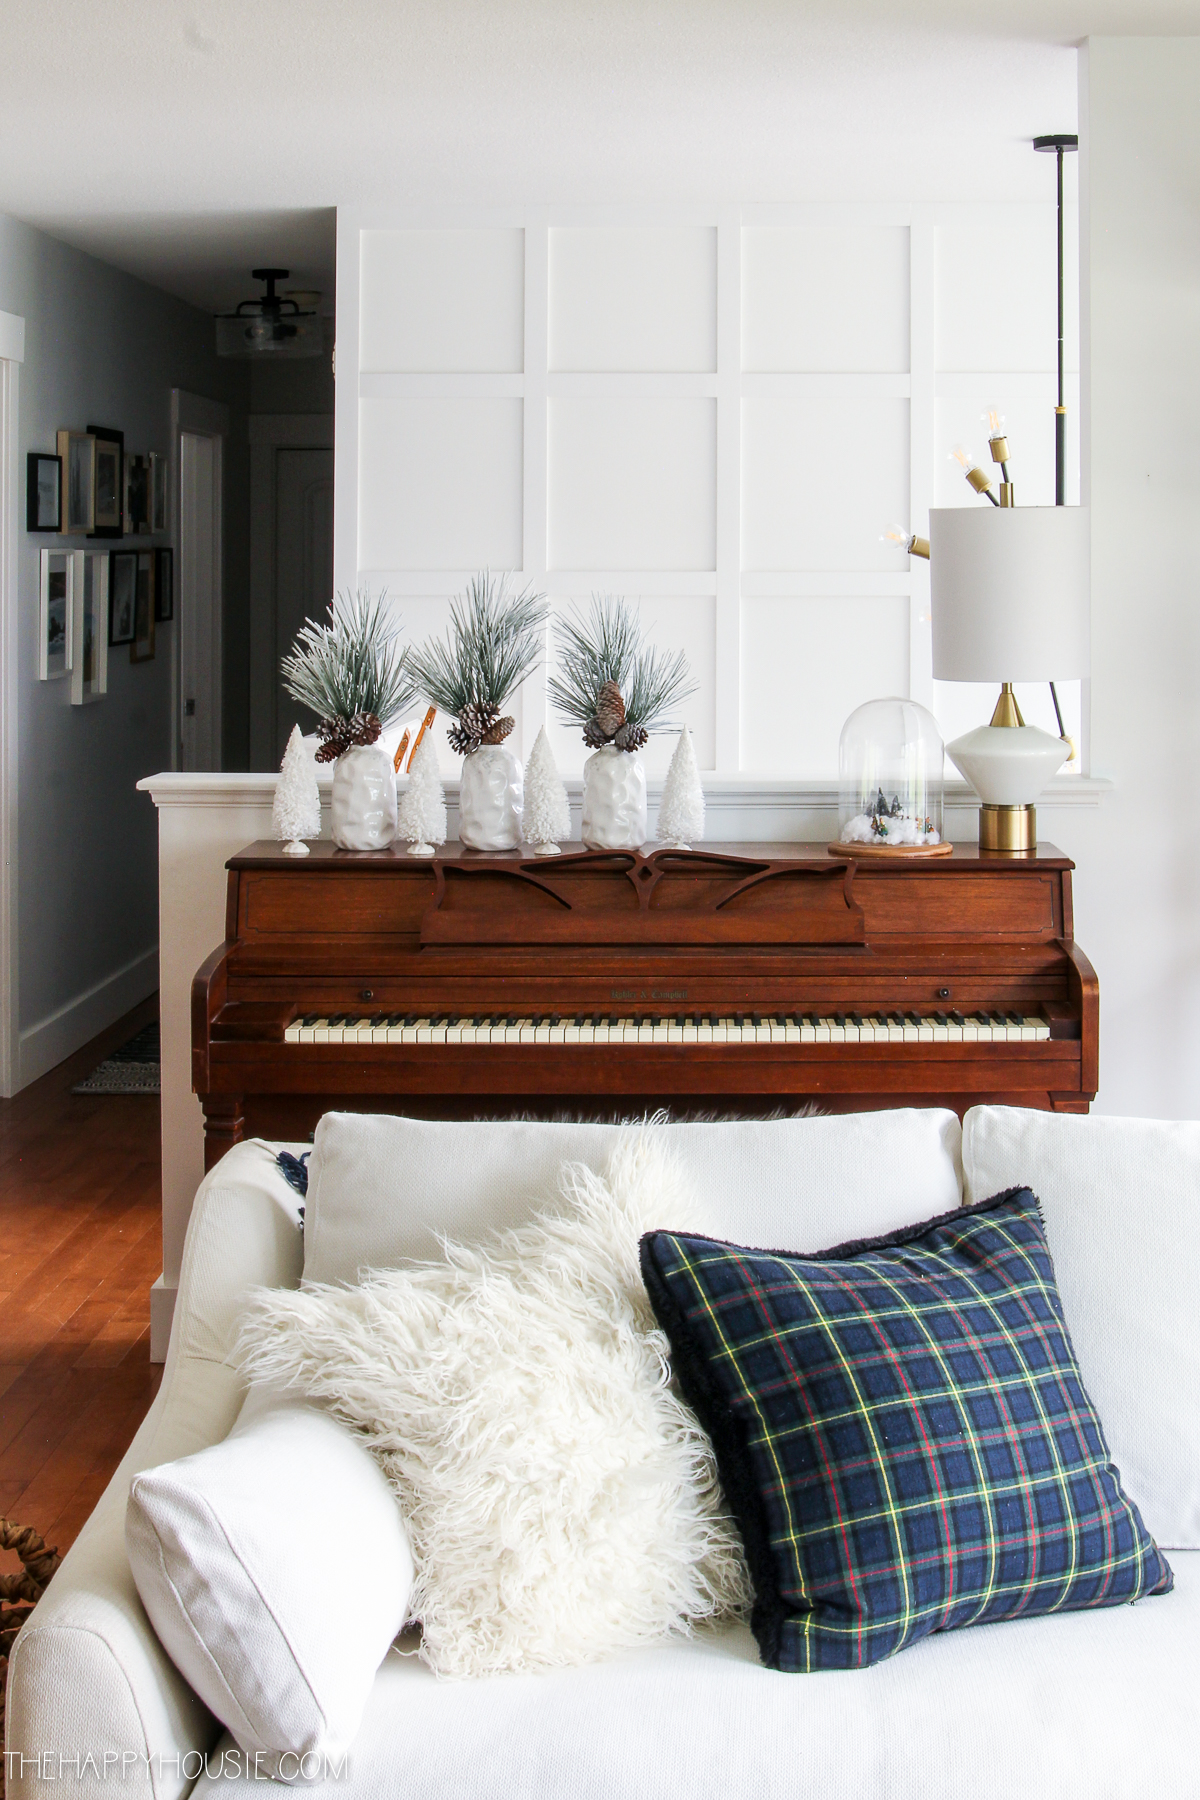 A wooden piano is behind the white couch in the living room.